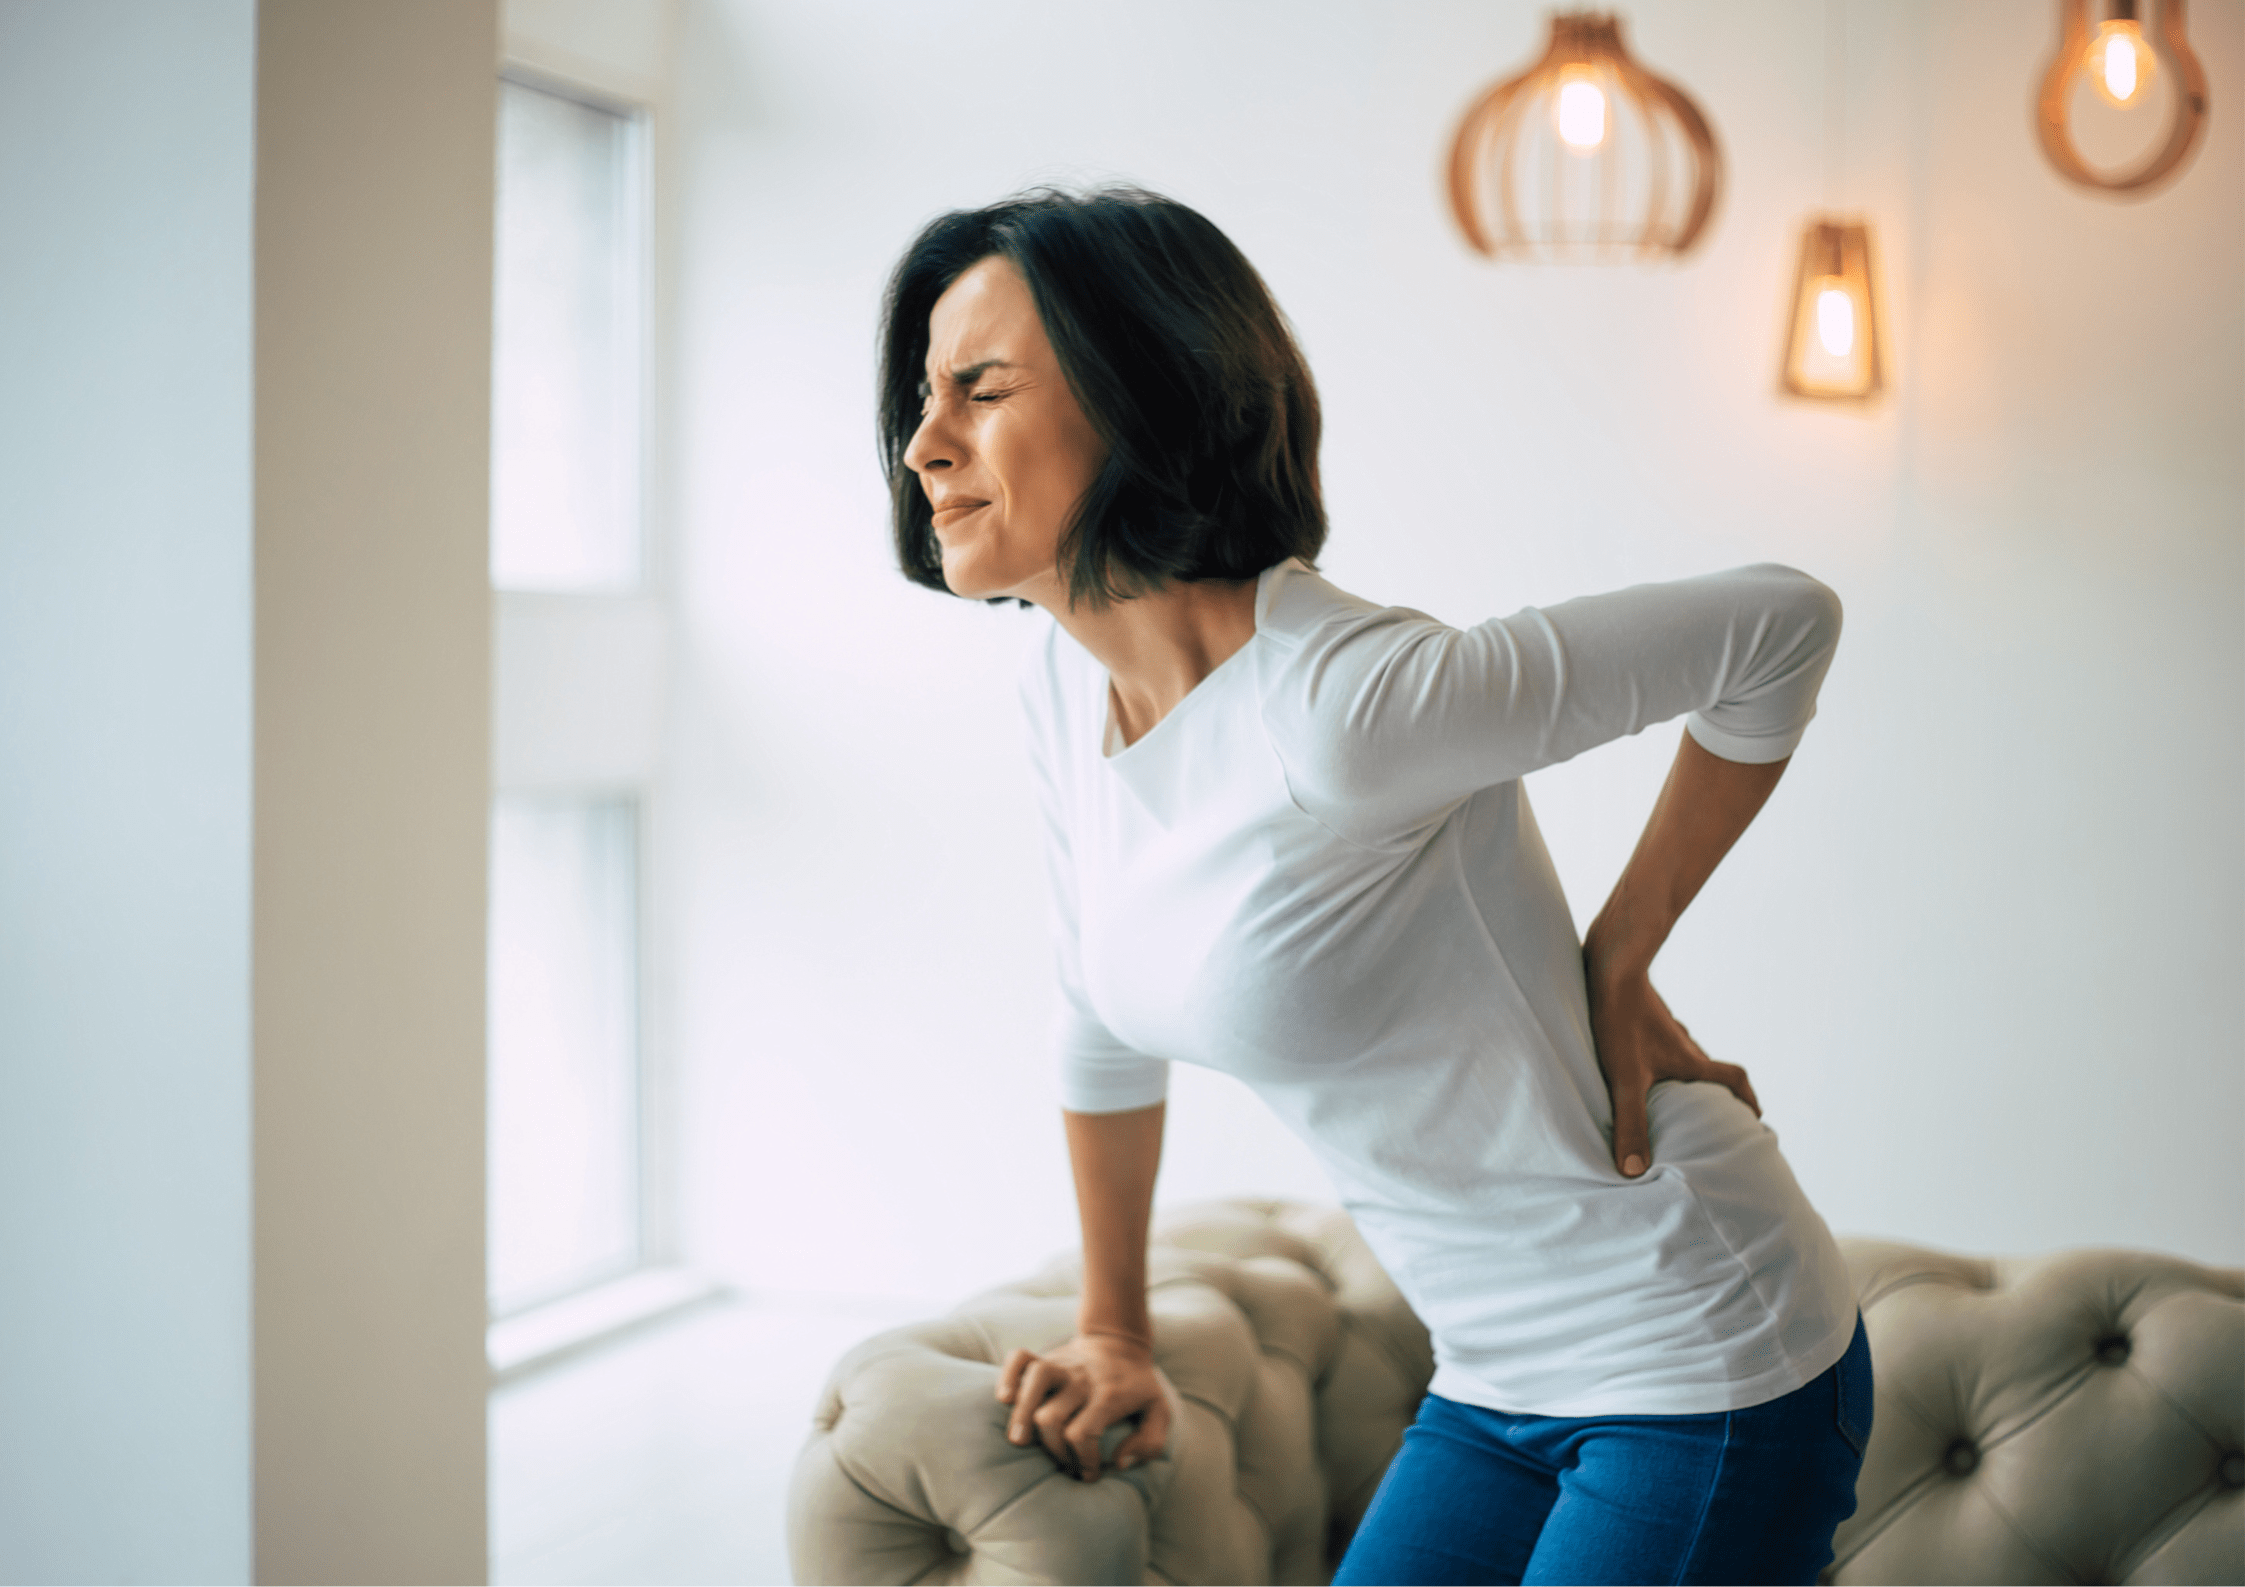 Electrotherapy: The Lower Back Pain Treatment You've Never Heard